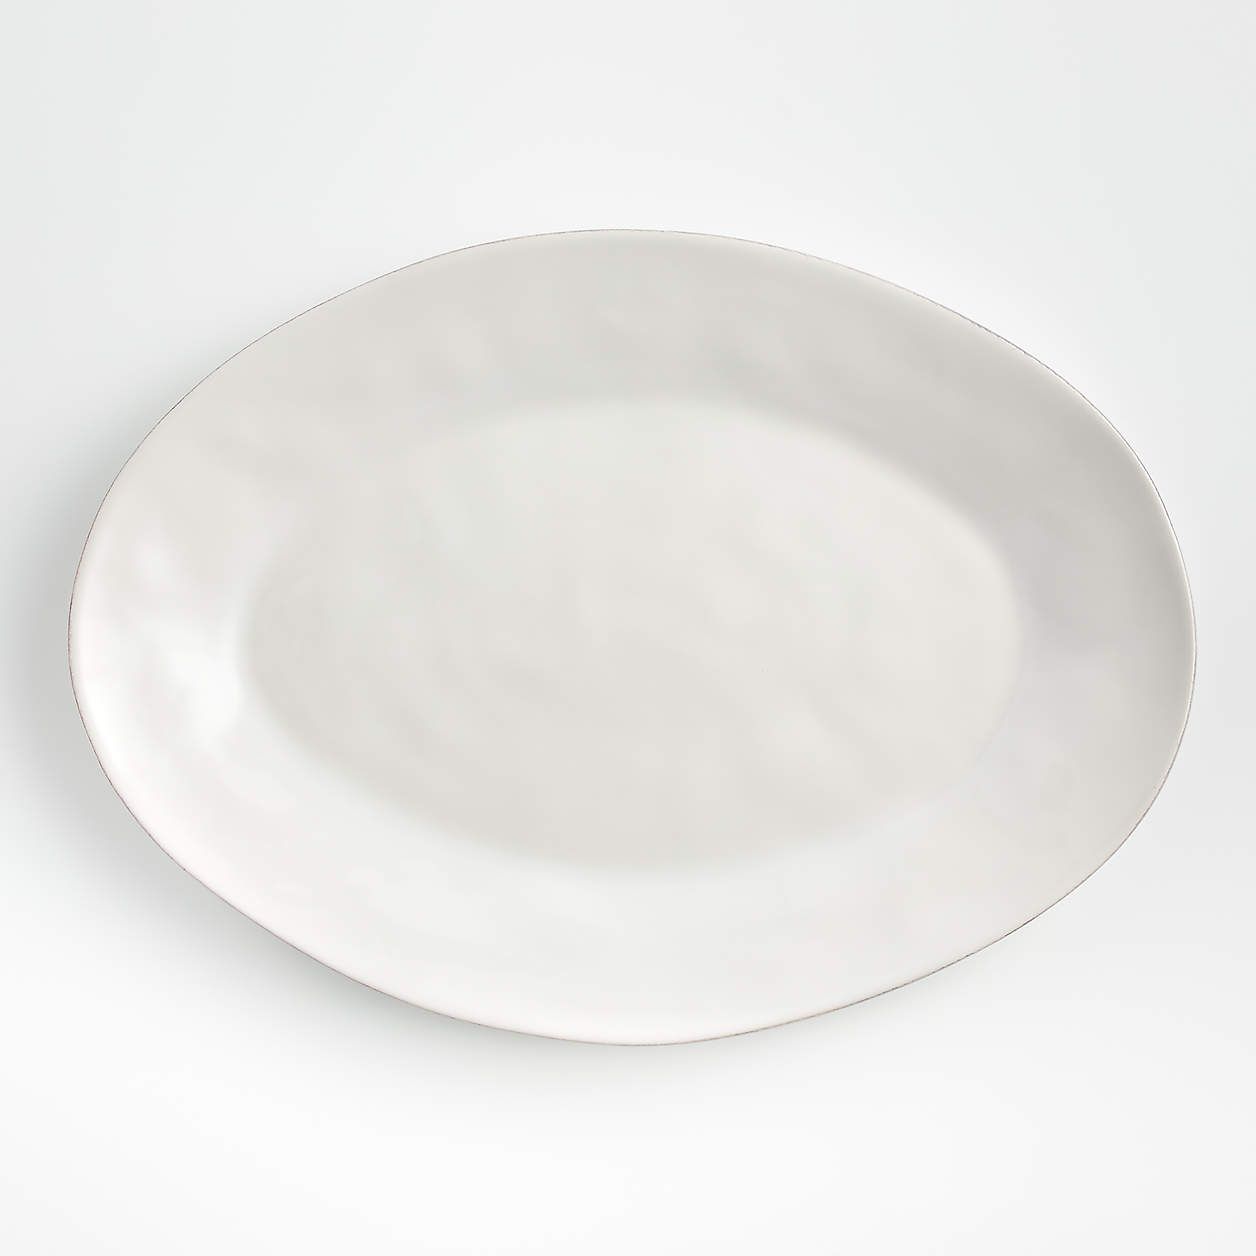 Marin Grey Large Oval Platter + Reviews | Crate and Barrel | Crate & Barrel